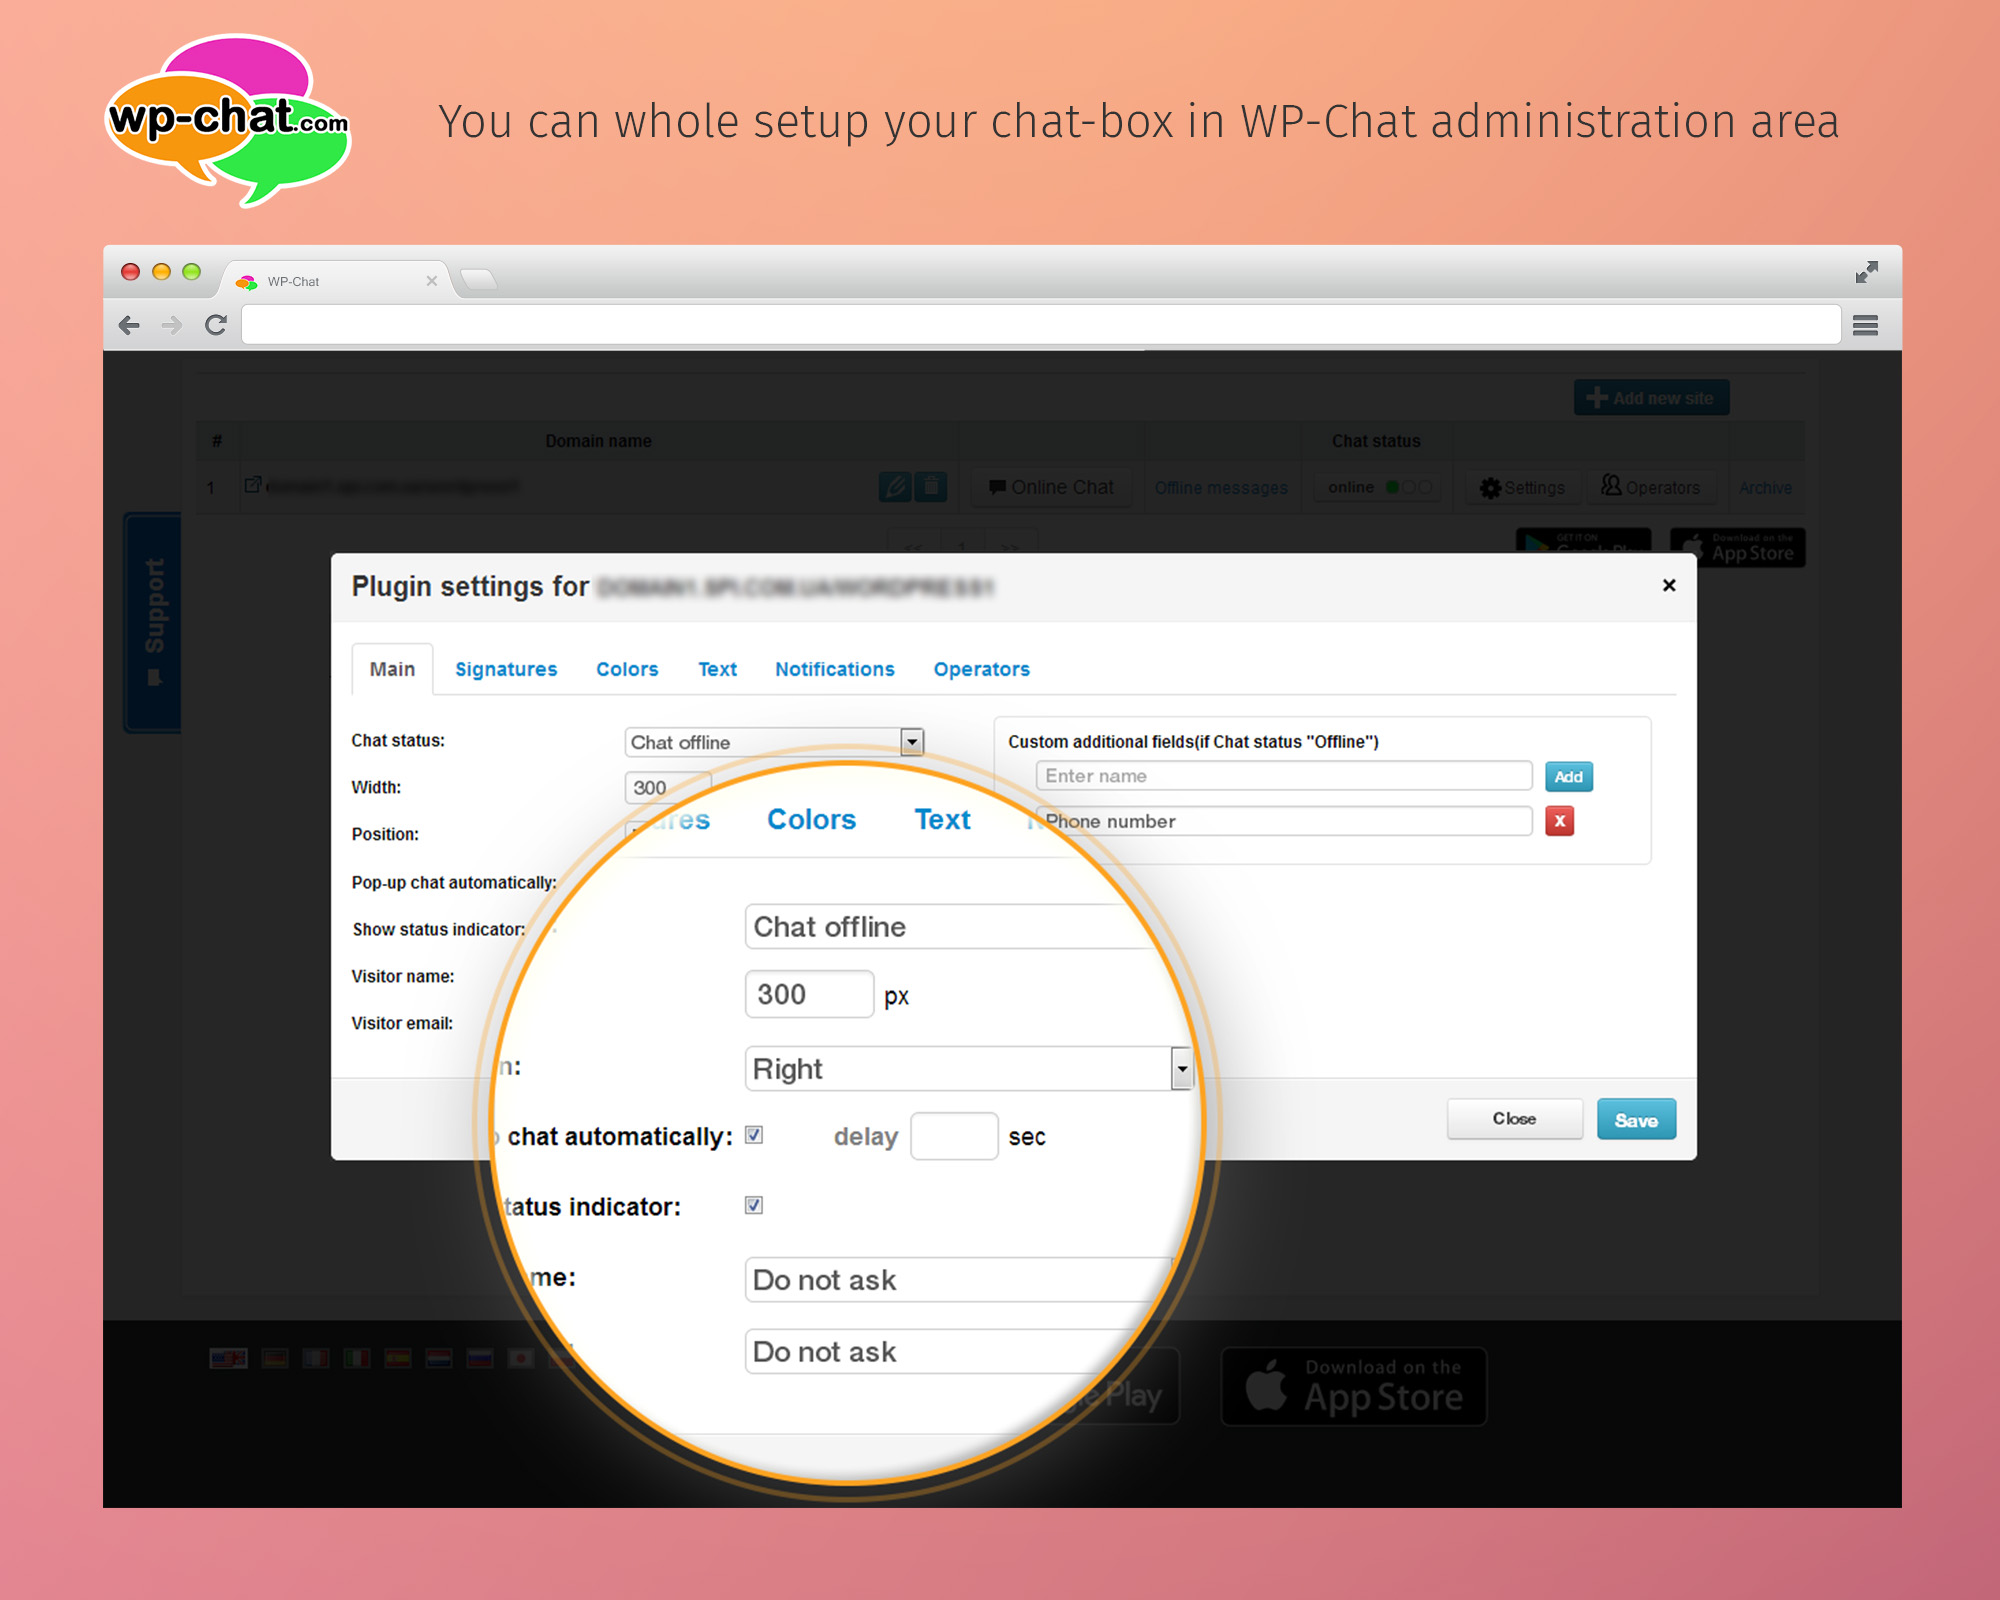 Fully customizable chat-box interface possesses the wide range of colors and texts to make it looks pretty, user-friendly and attractive on website.